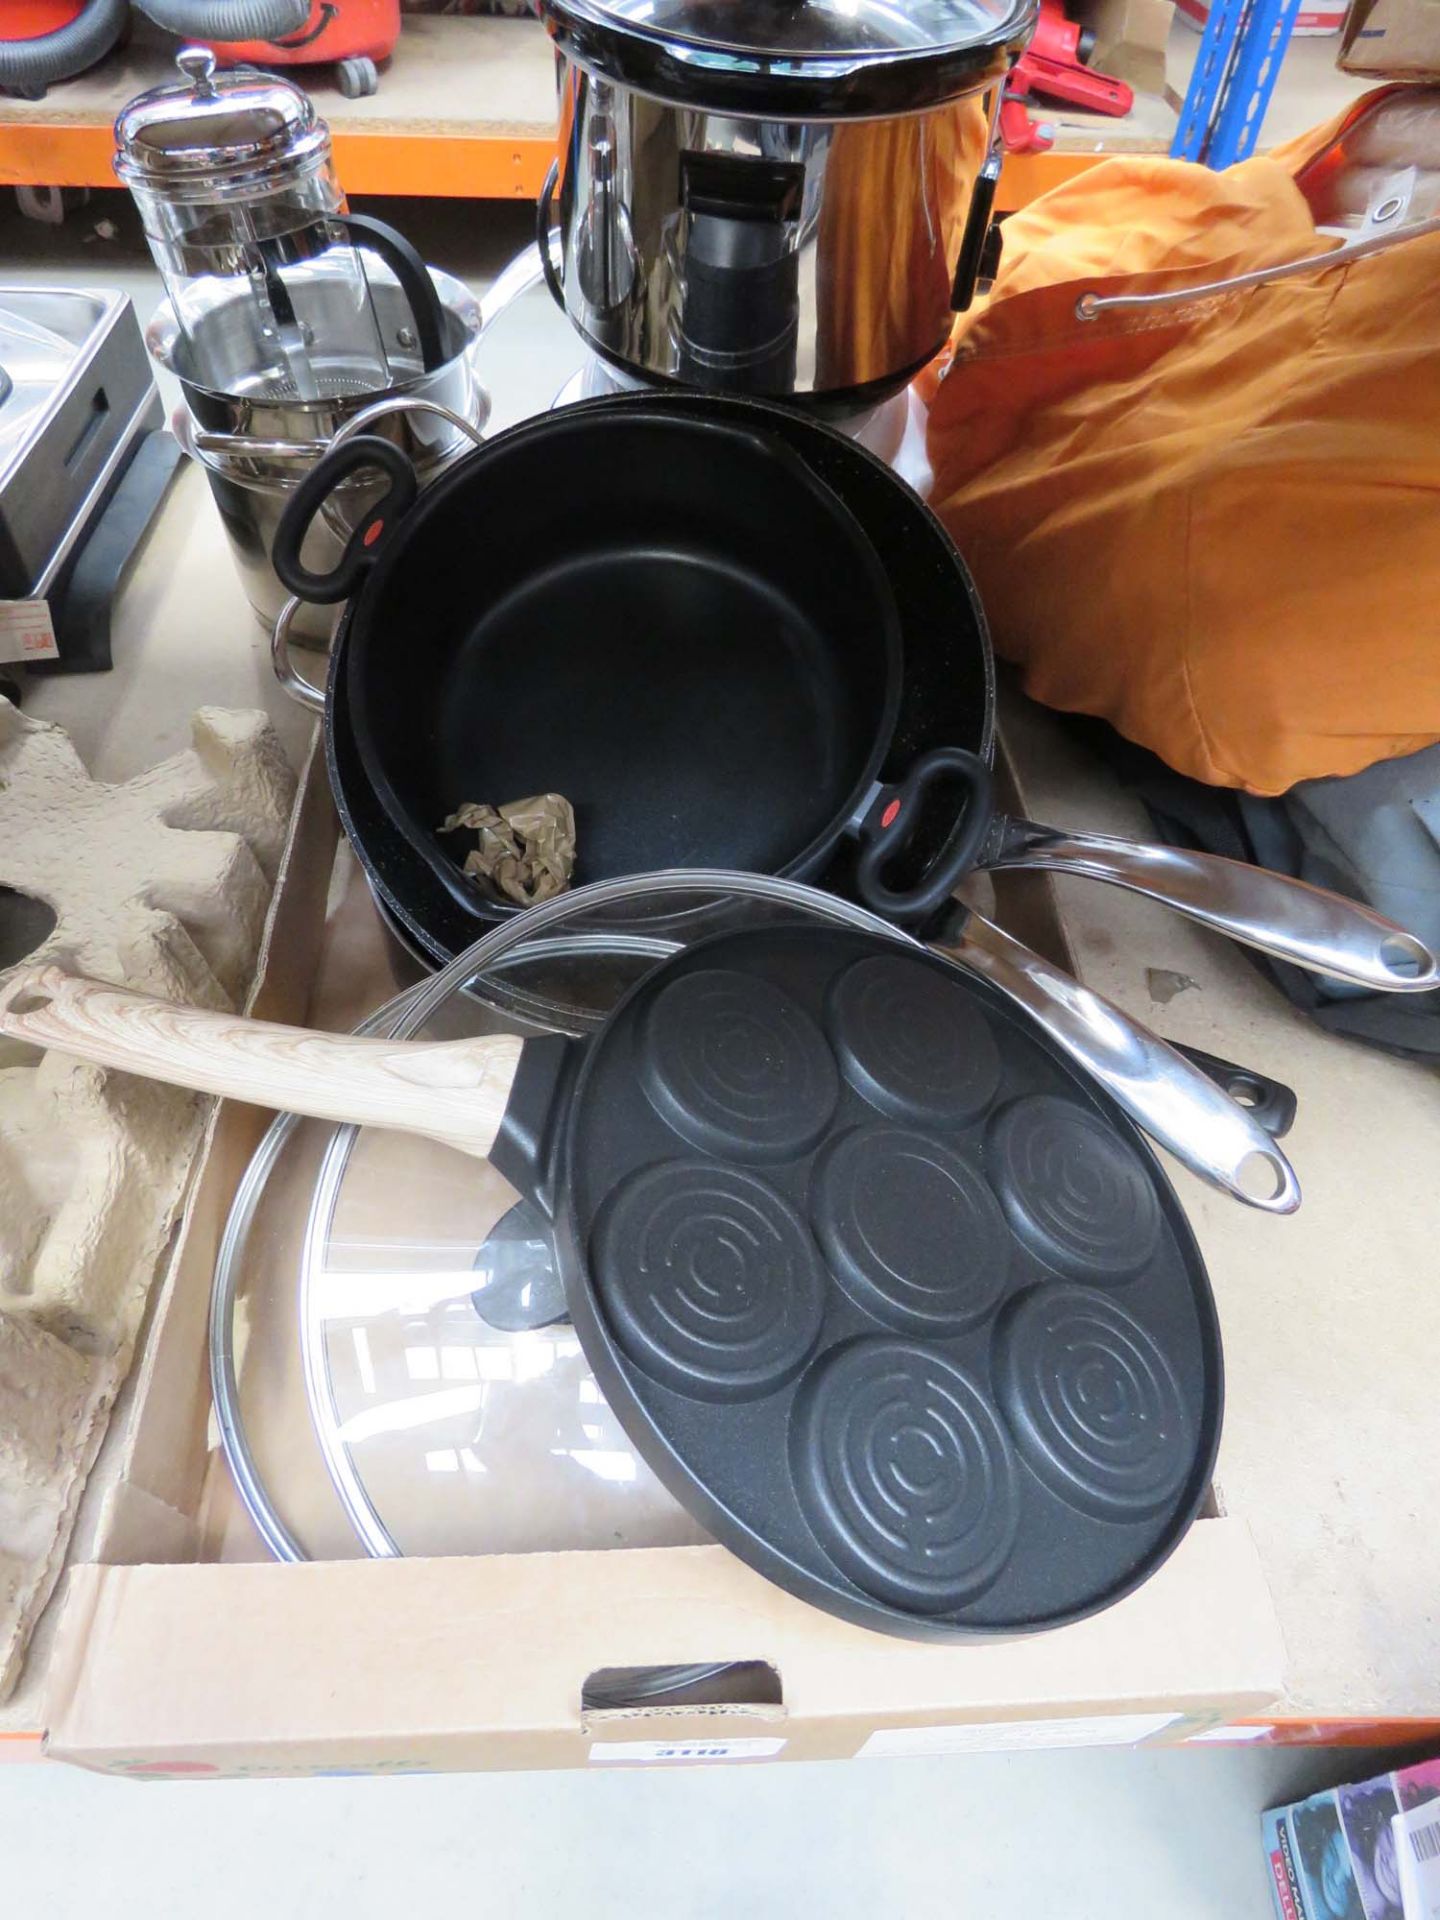 Tray containing used cooking pans